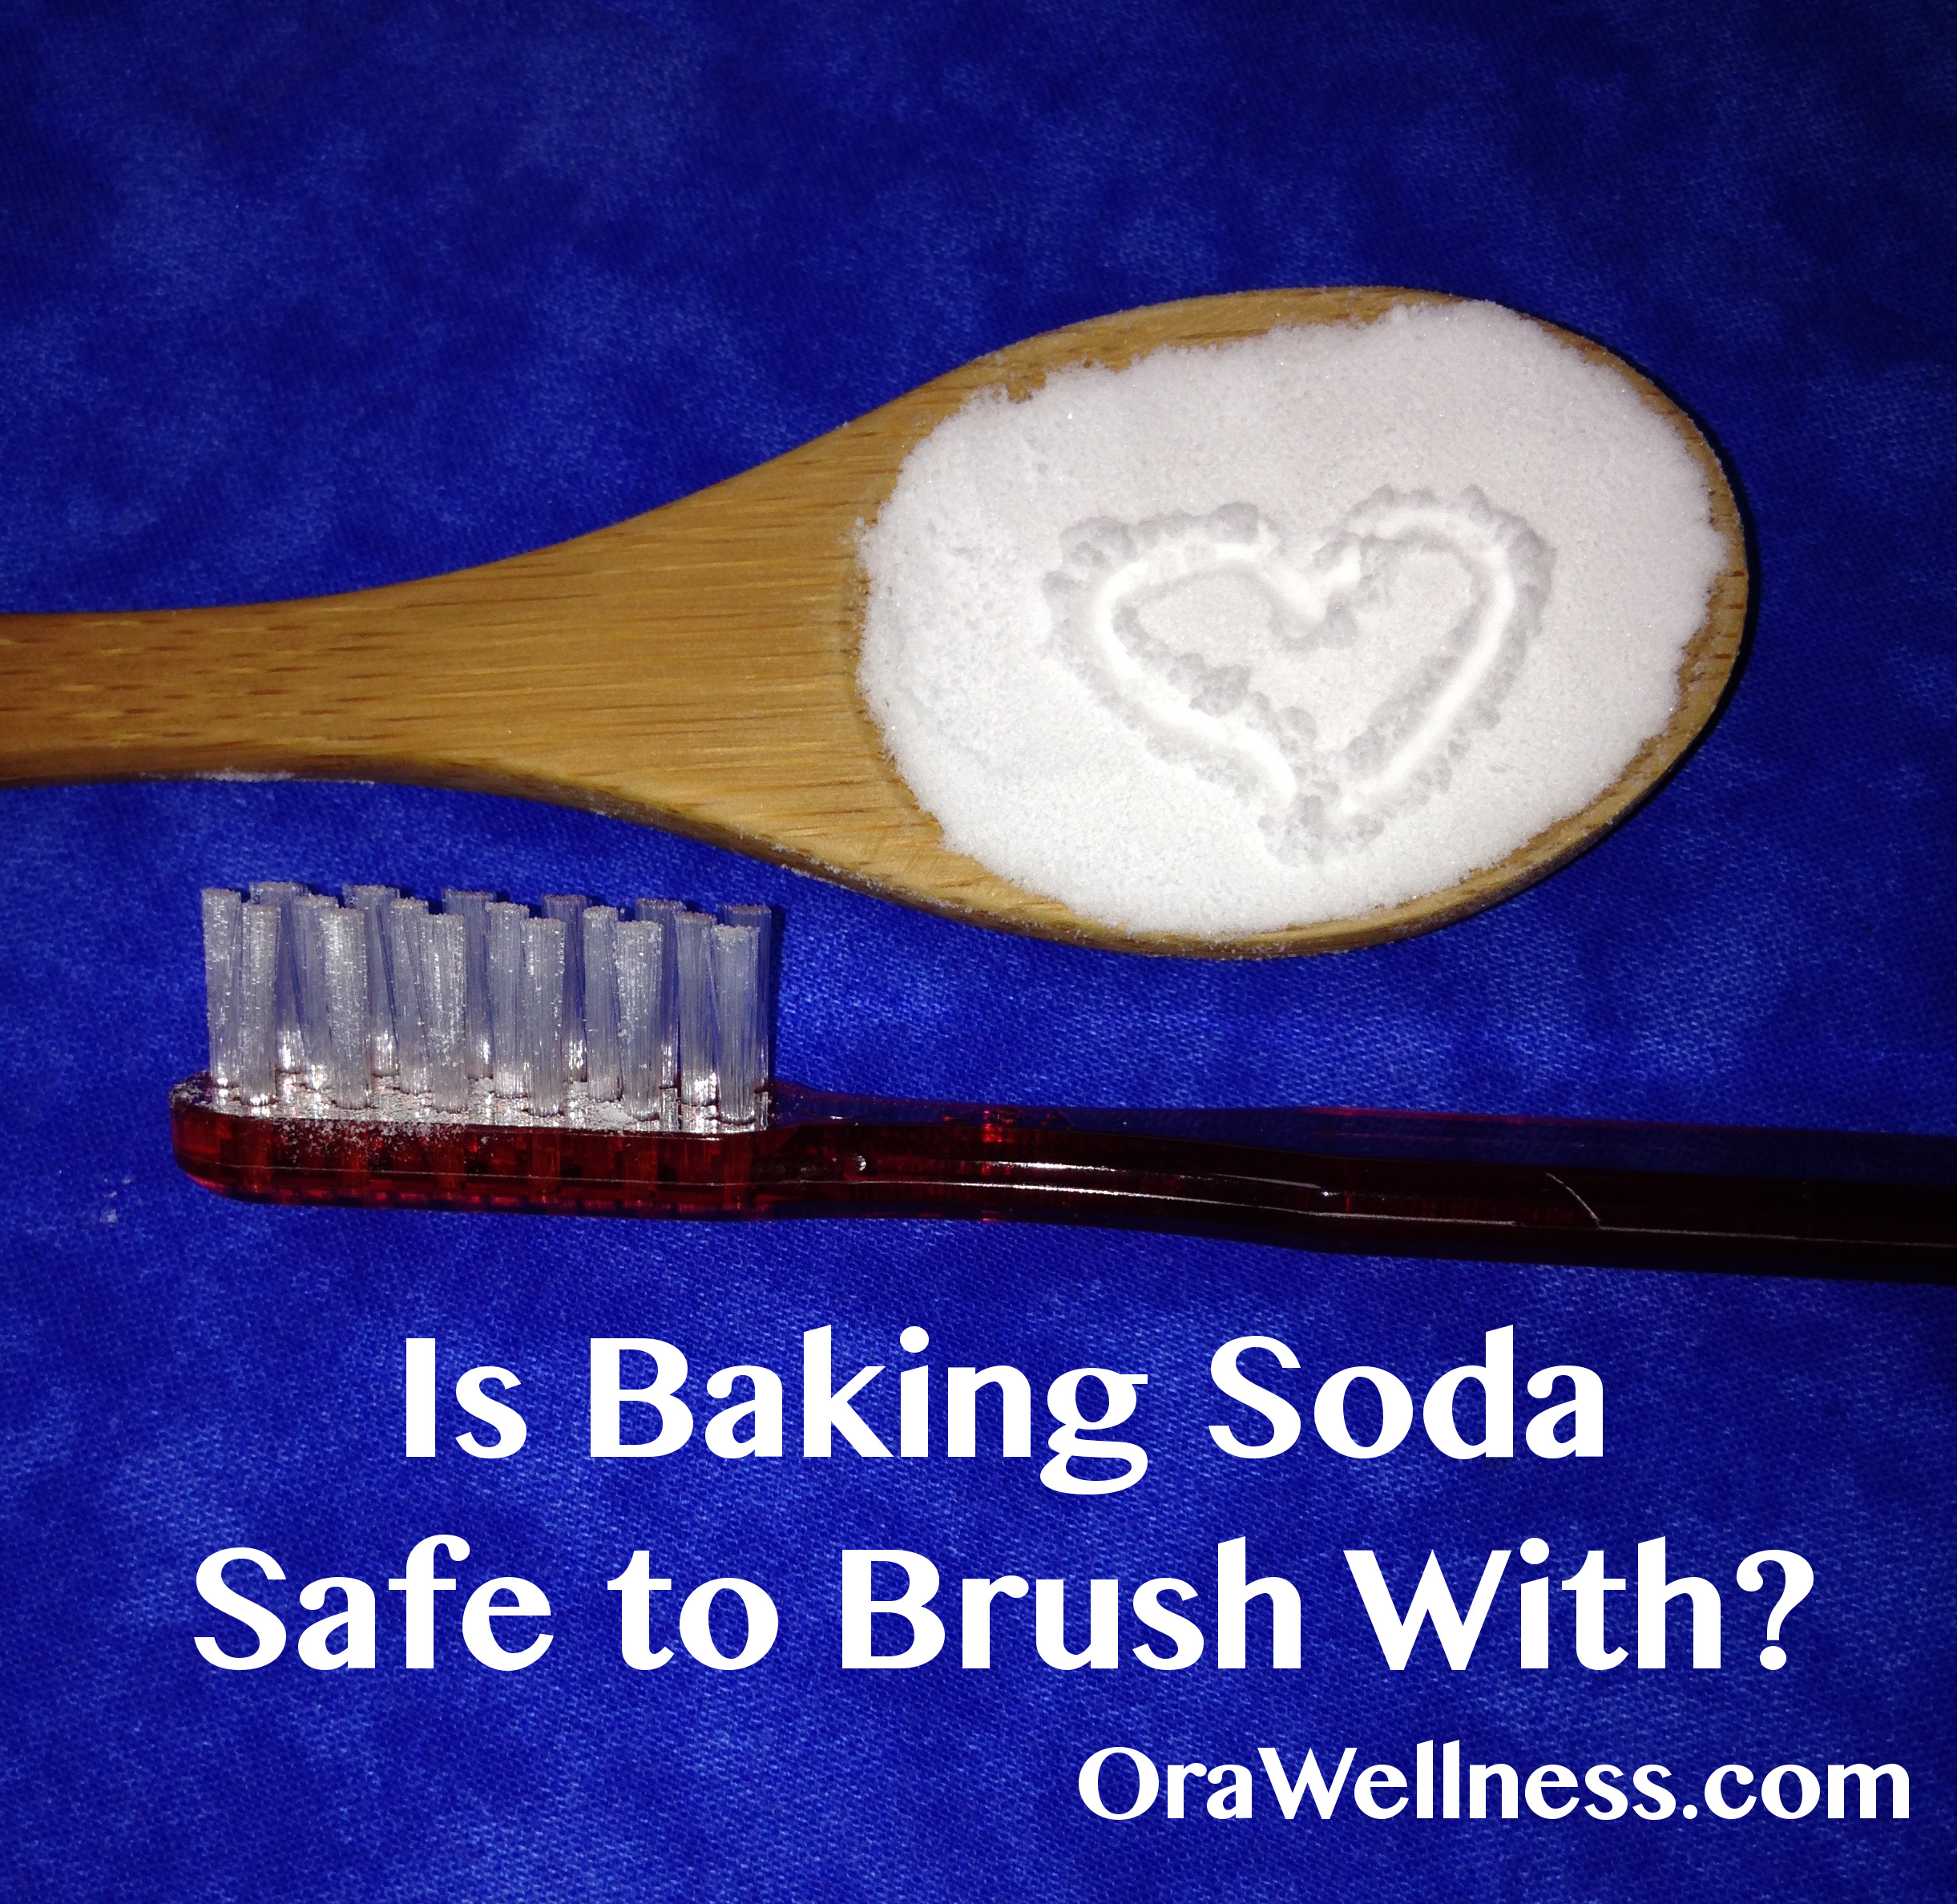 Daggry Udgravning imperium Is baking soda safe to brush with? Can baking soda damage our teeth?